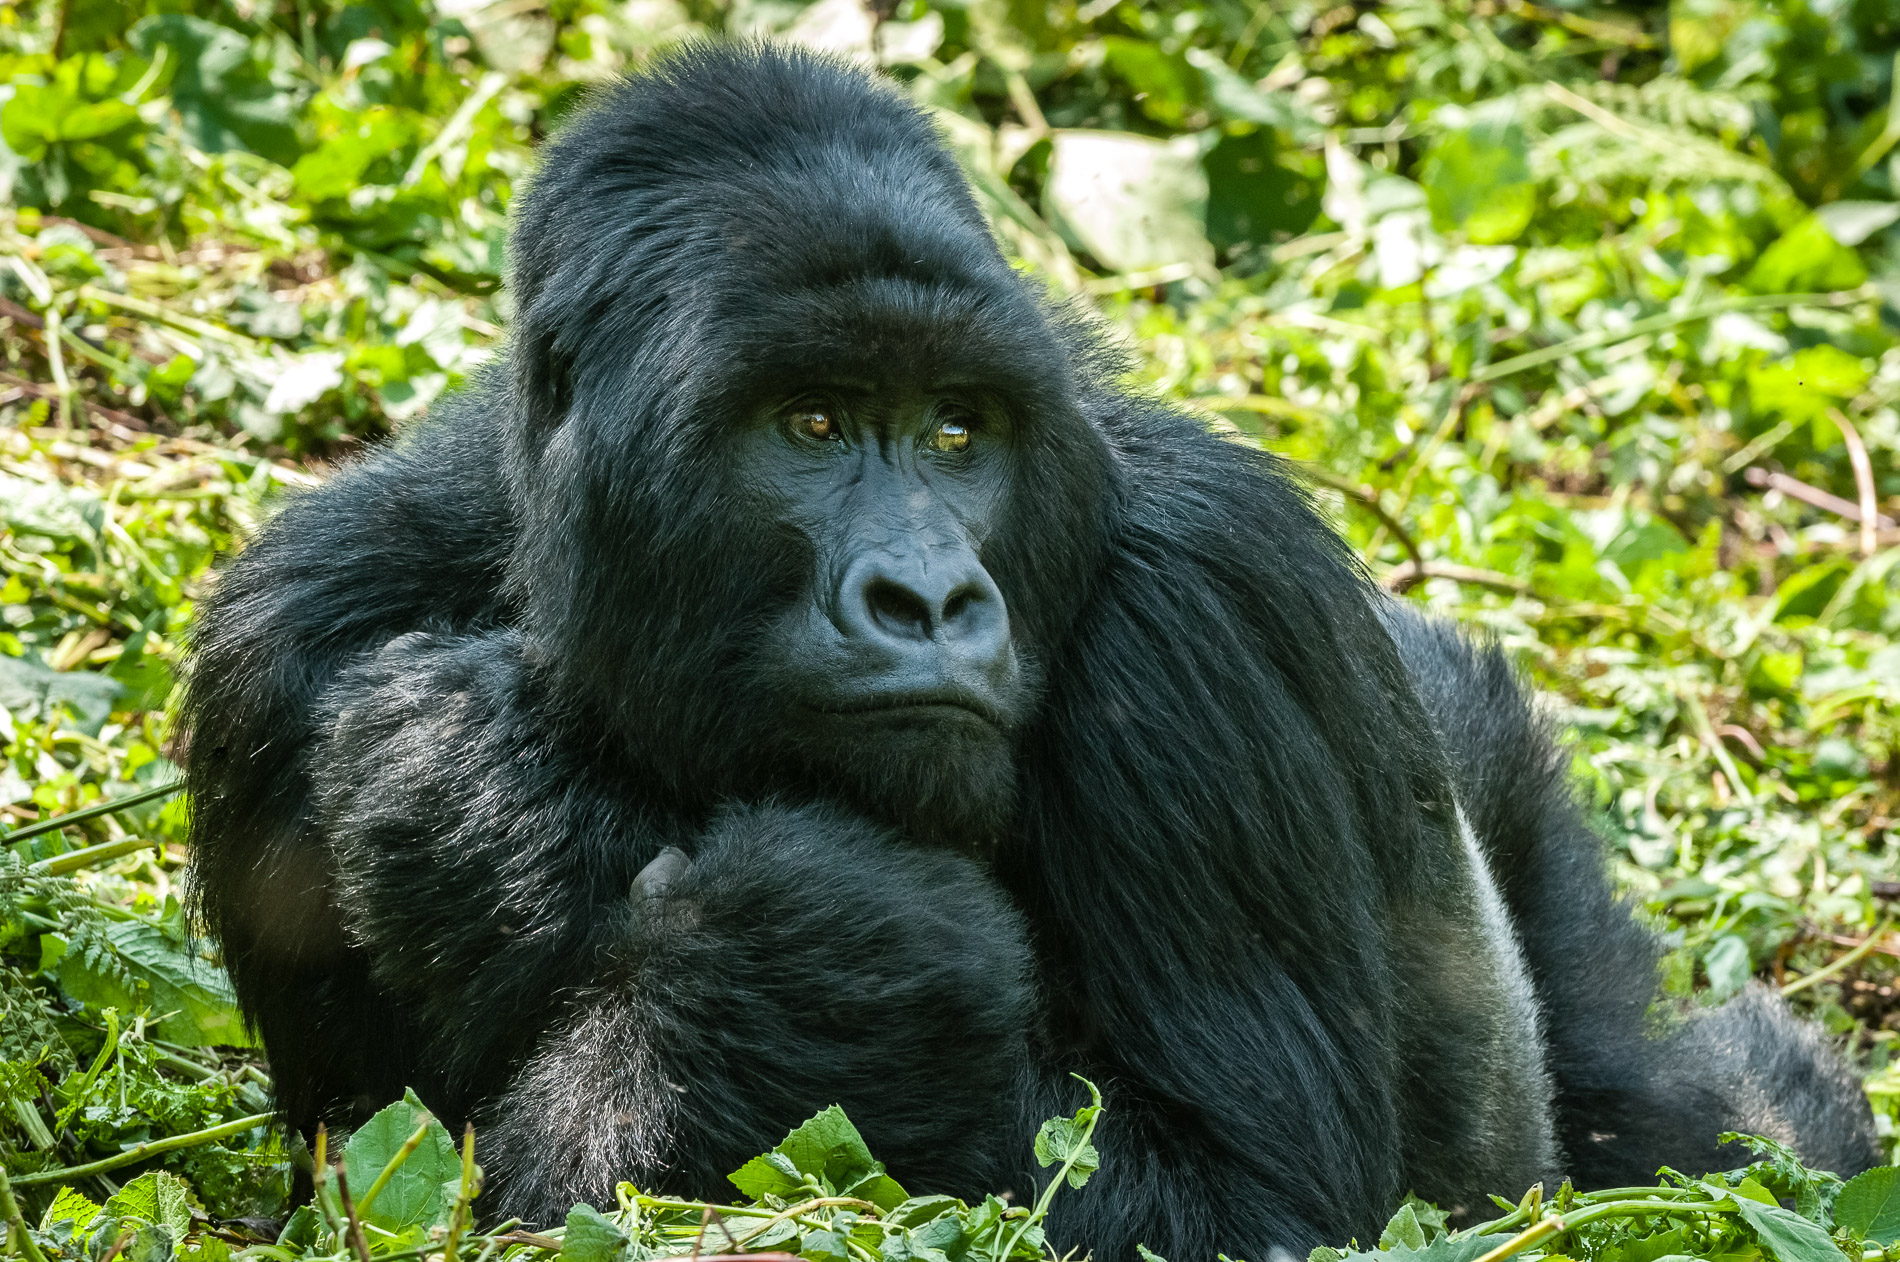 Mountain gorillas are endangered. There remain only 700 in the world, threatened by war, poaching and deforestation. Virunga, Congo.